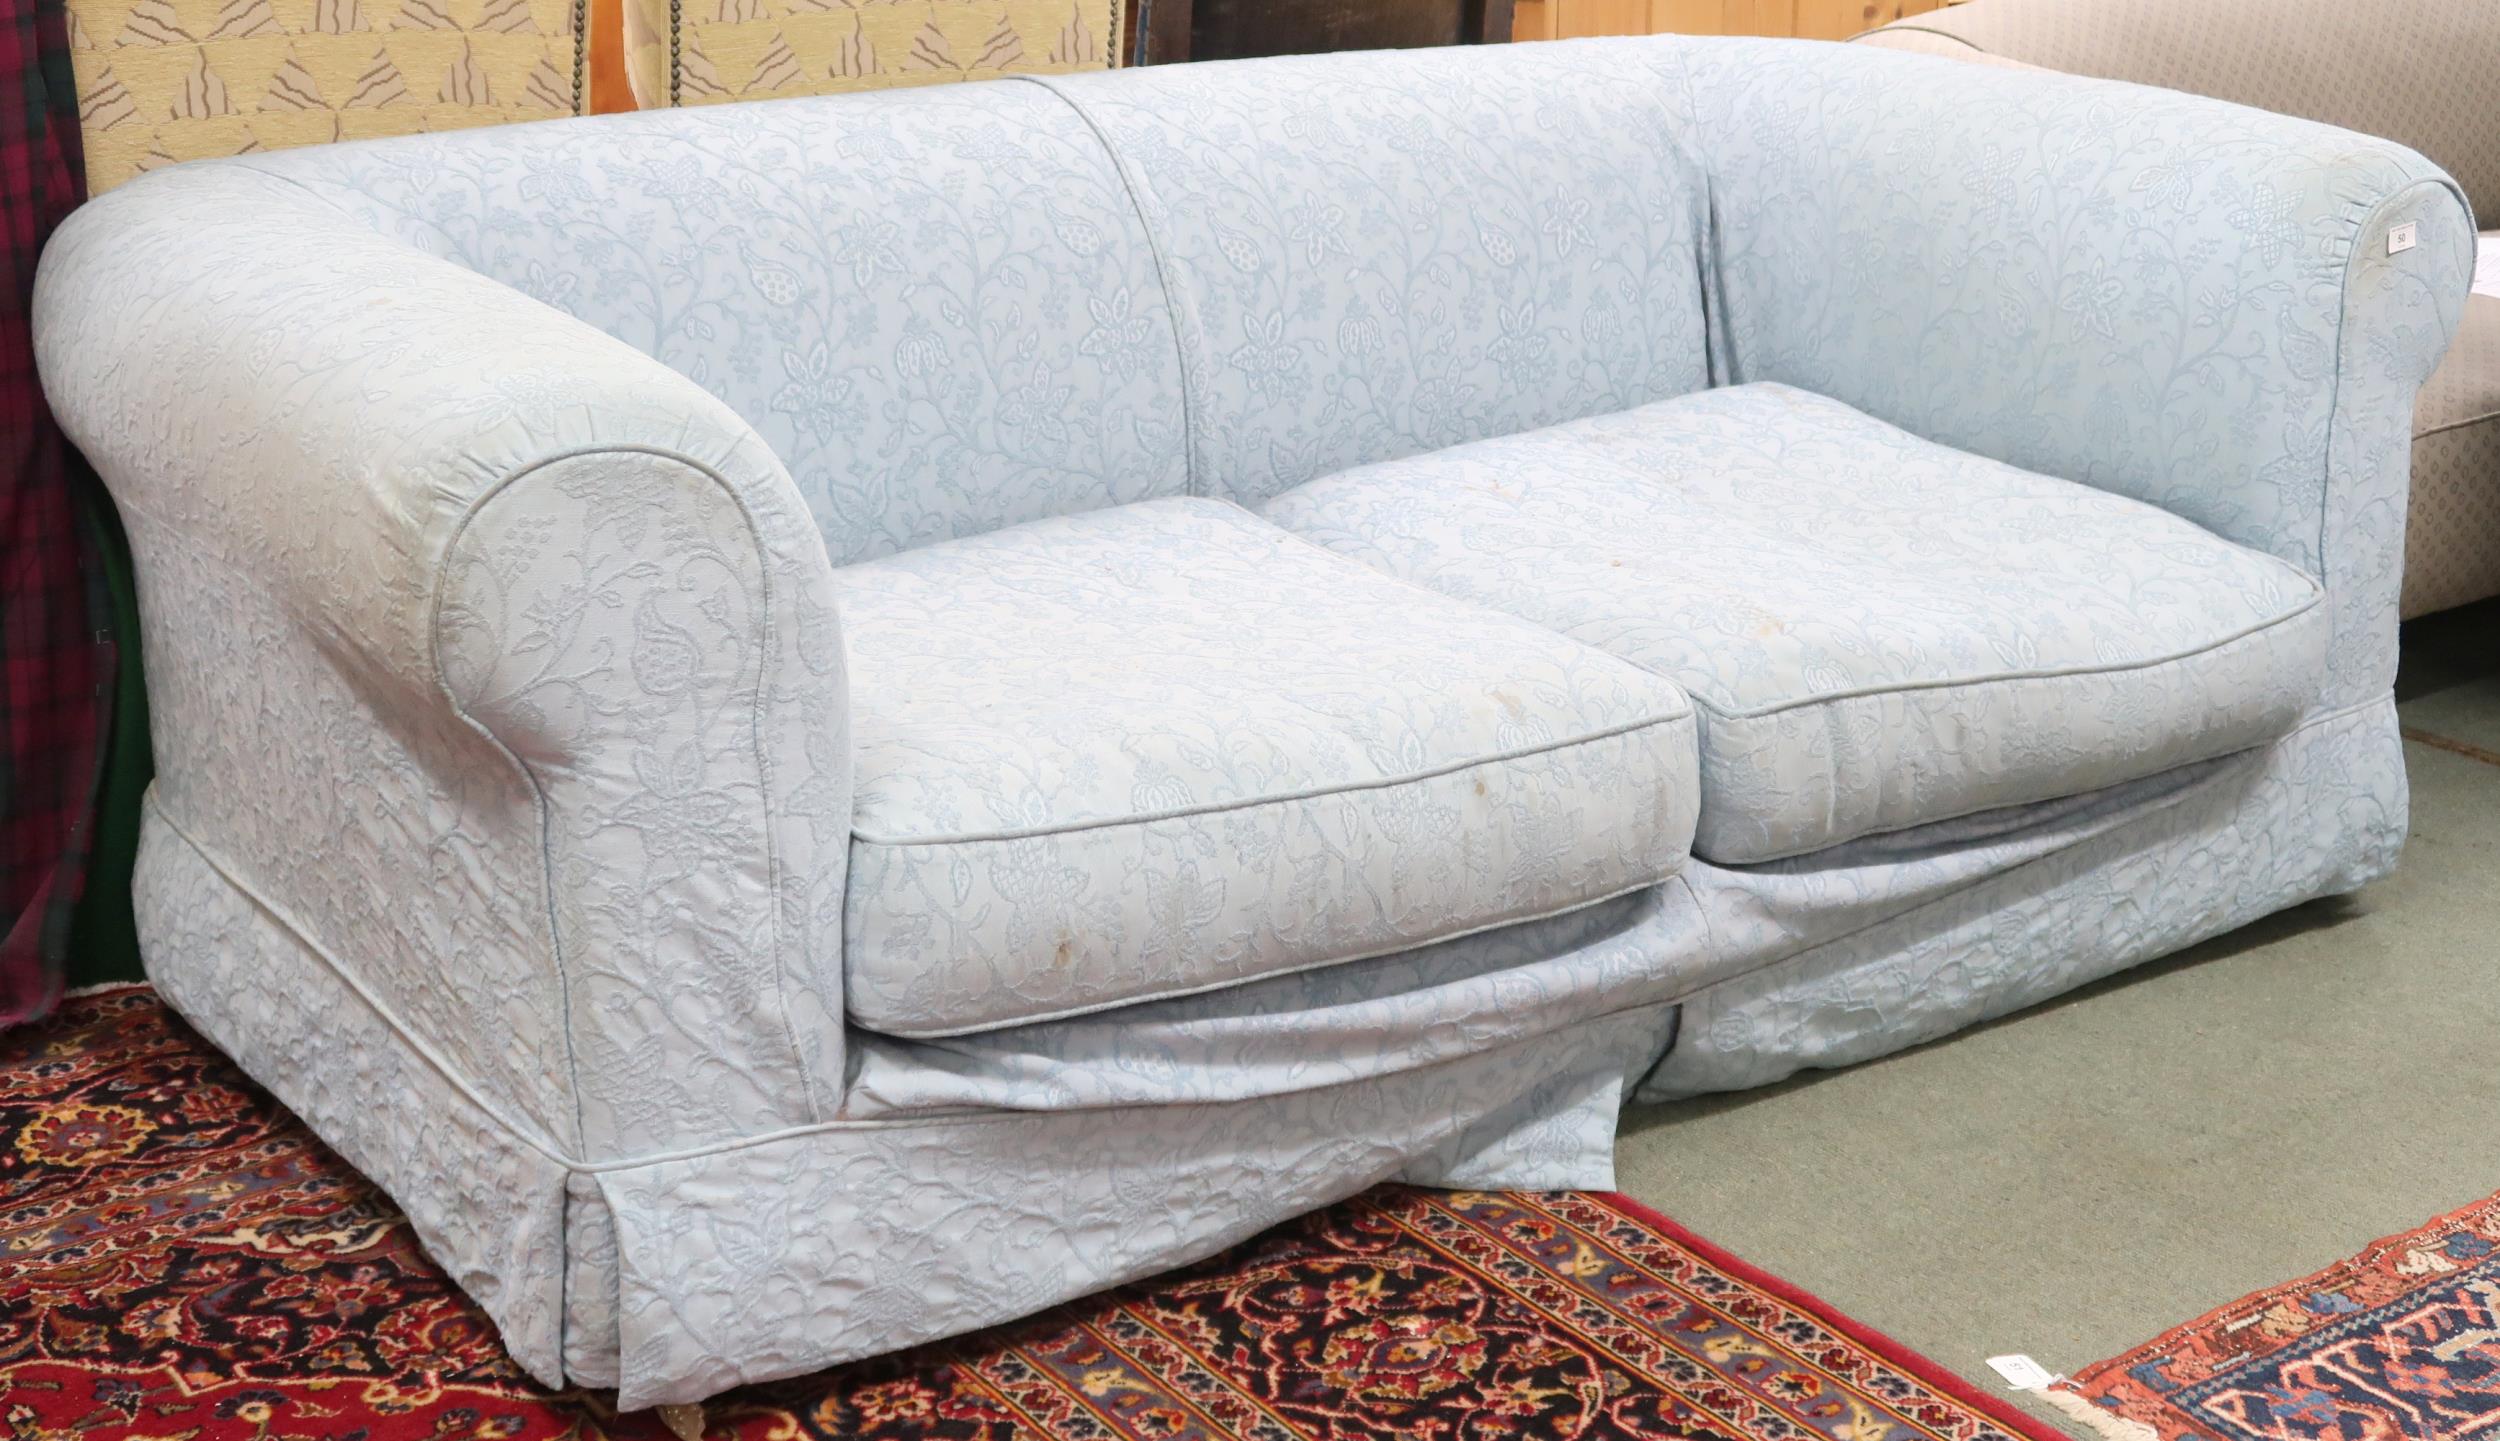 A 20th century blue Damask upholstered two seater settee, 69cm high x 183cm wide x 106cm deep - Image 2 of 2